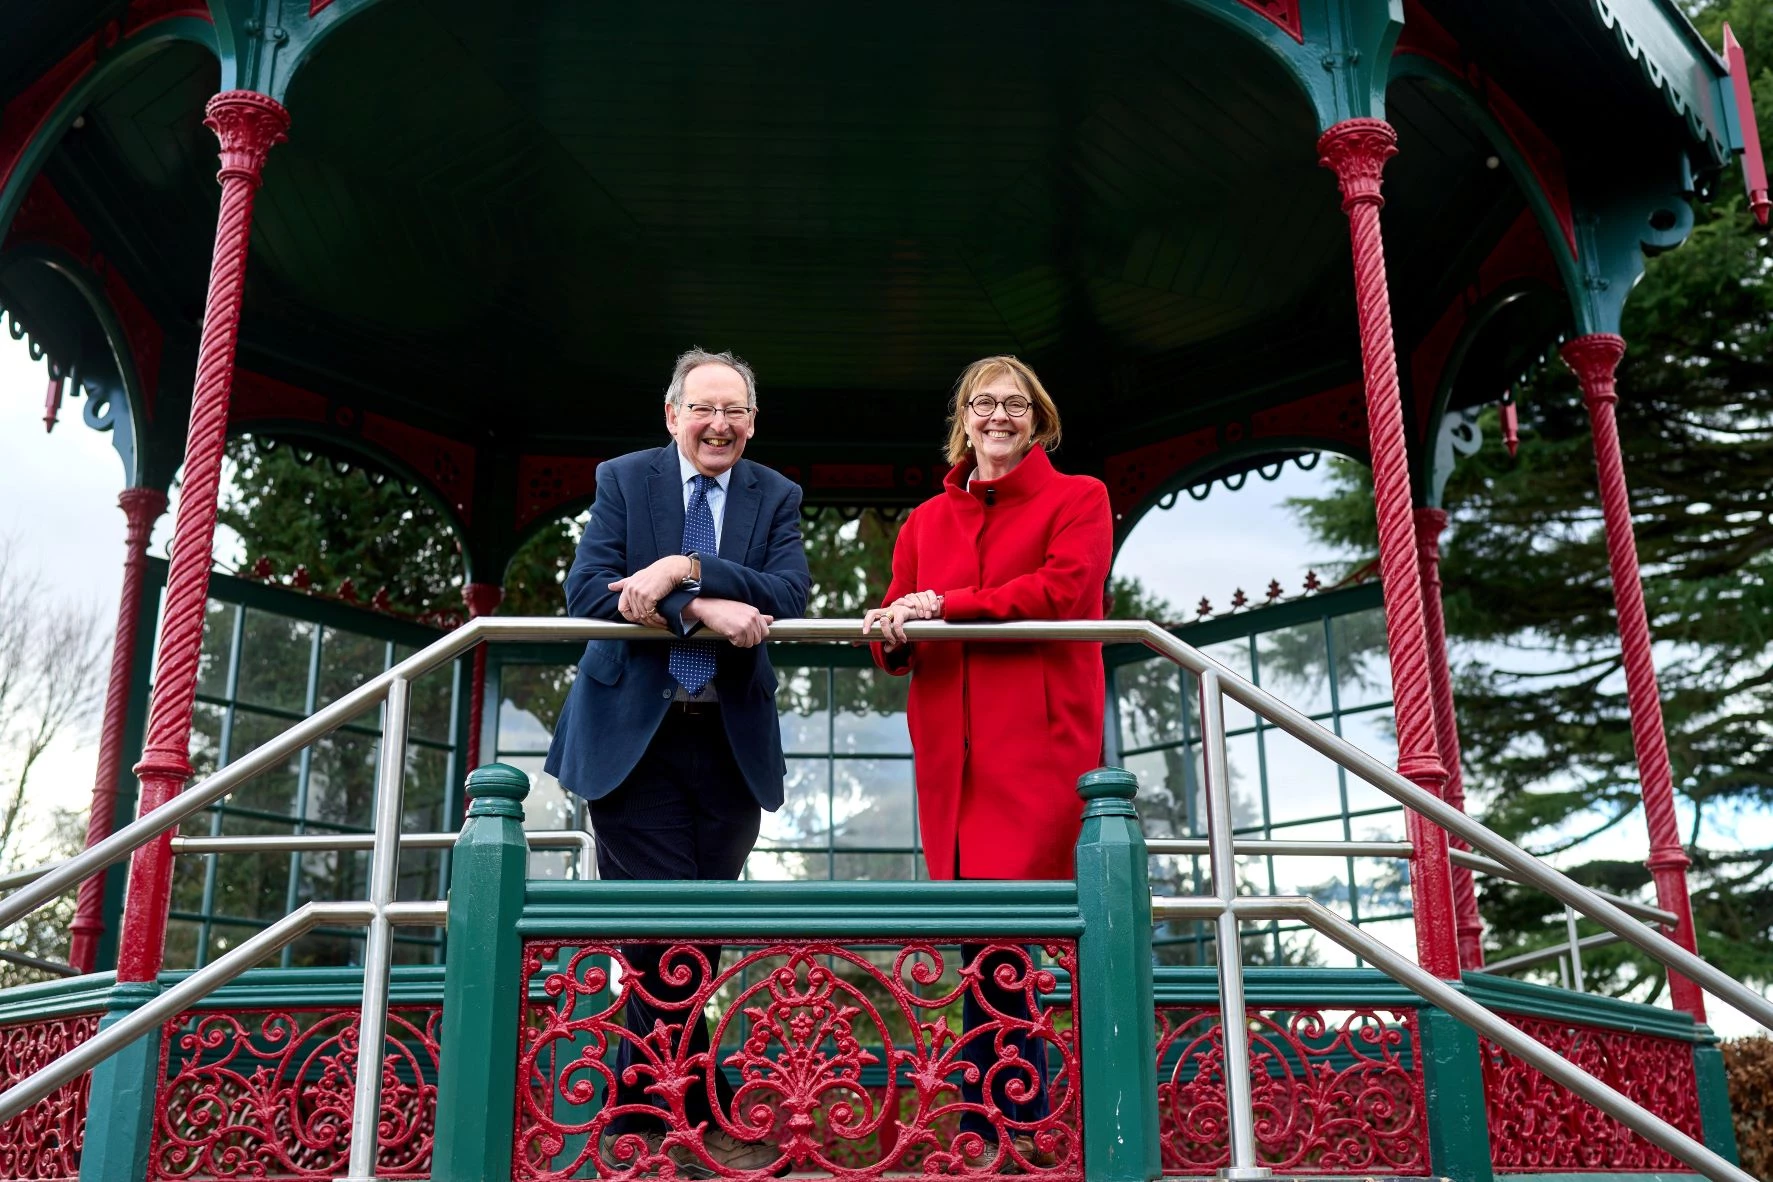 Sue Beardsmore, incoming chair of Trustees at Birmingham Botanical Gardens, with Martyn Liberson, outgoing chair, at the newly restored bandstand